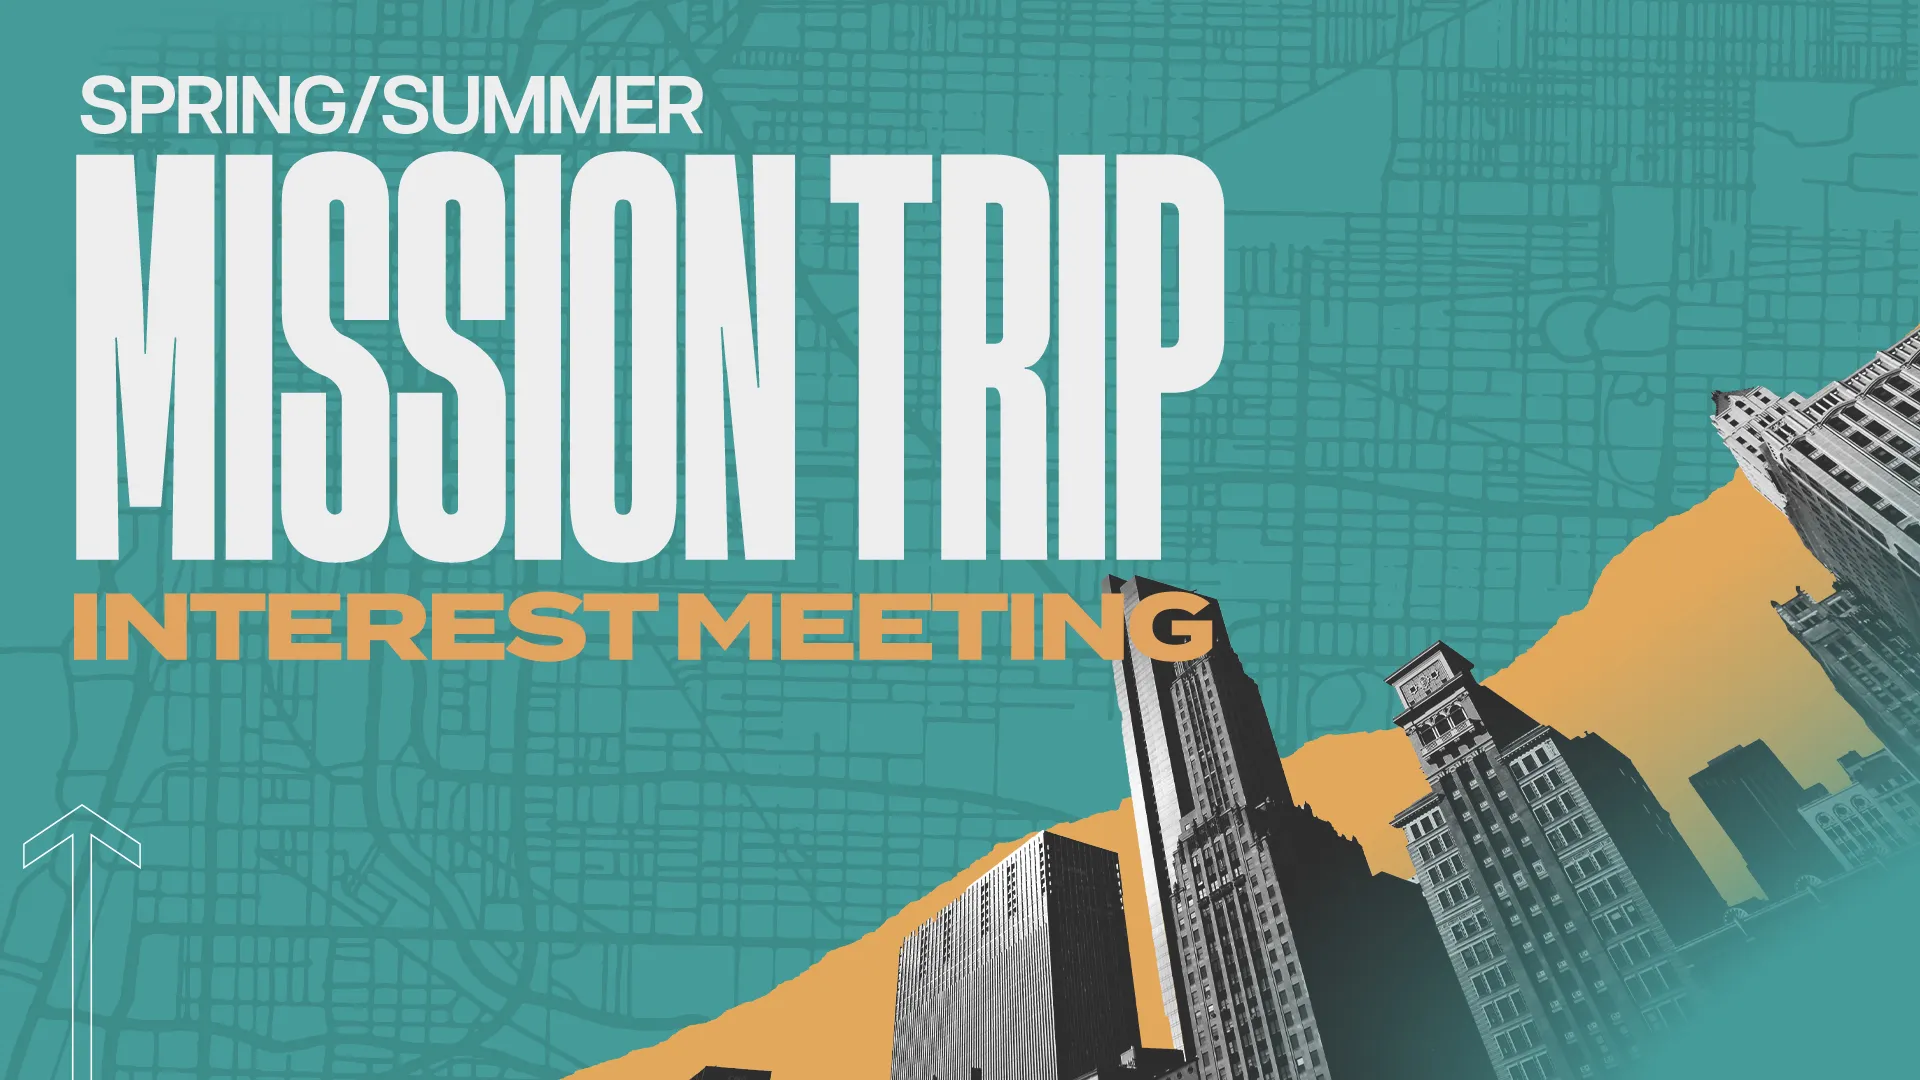 Capture the attention of your church community with this "Spring/Summer Mission Trip Interest Meeting" graphic. With its clear, professional design, it's perfect for calling volunteers to action and involvement in seasonal church missions.